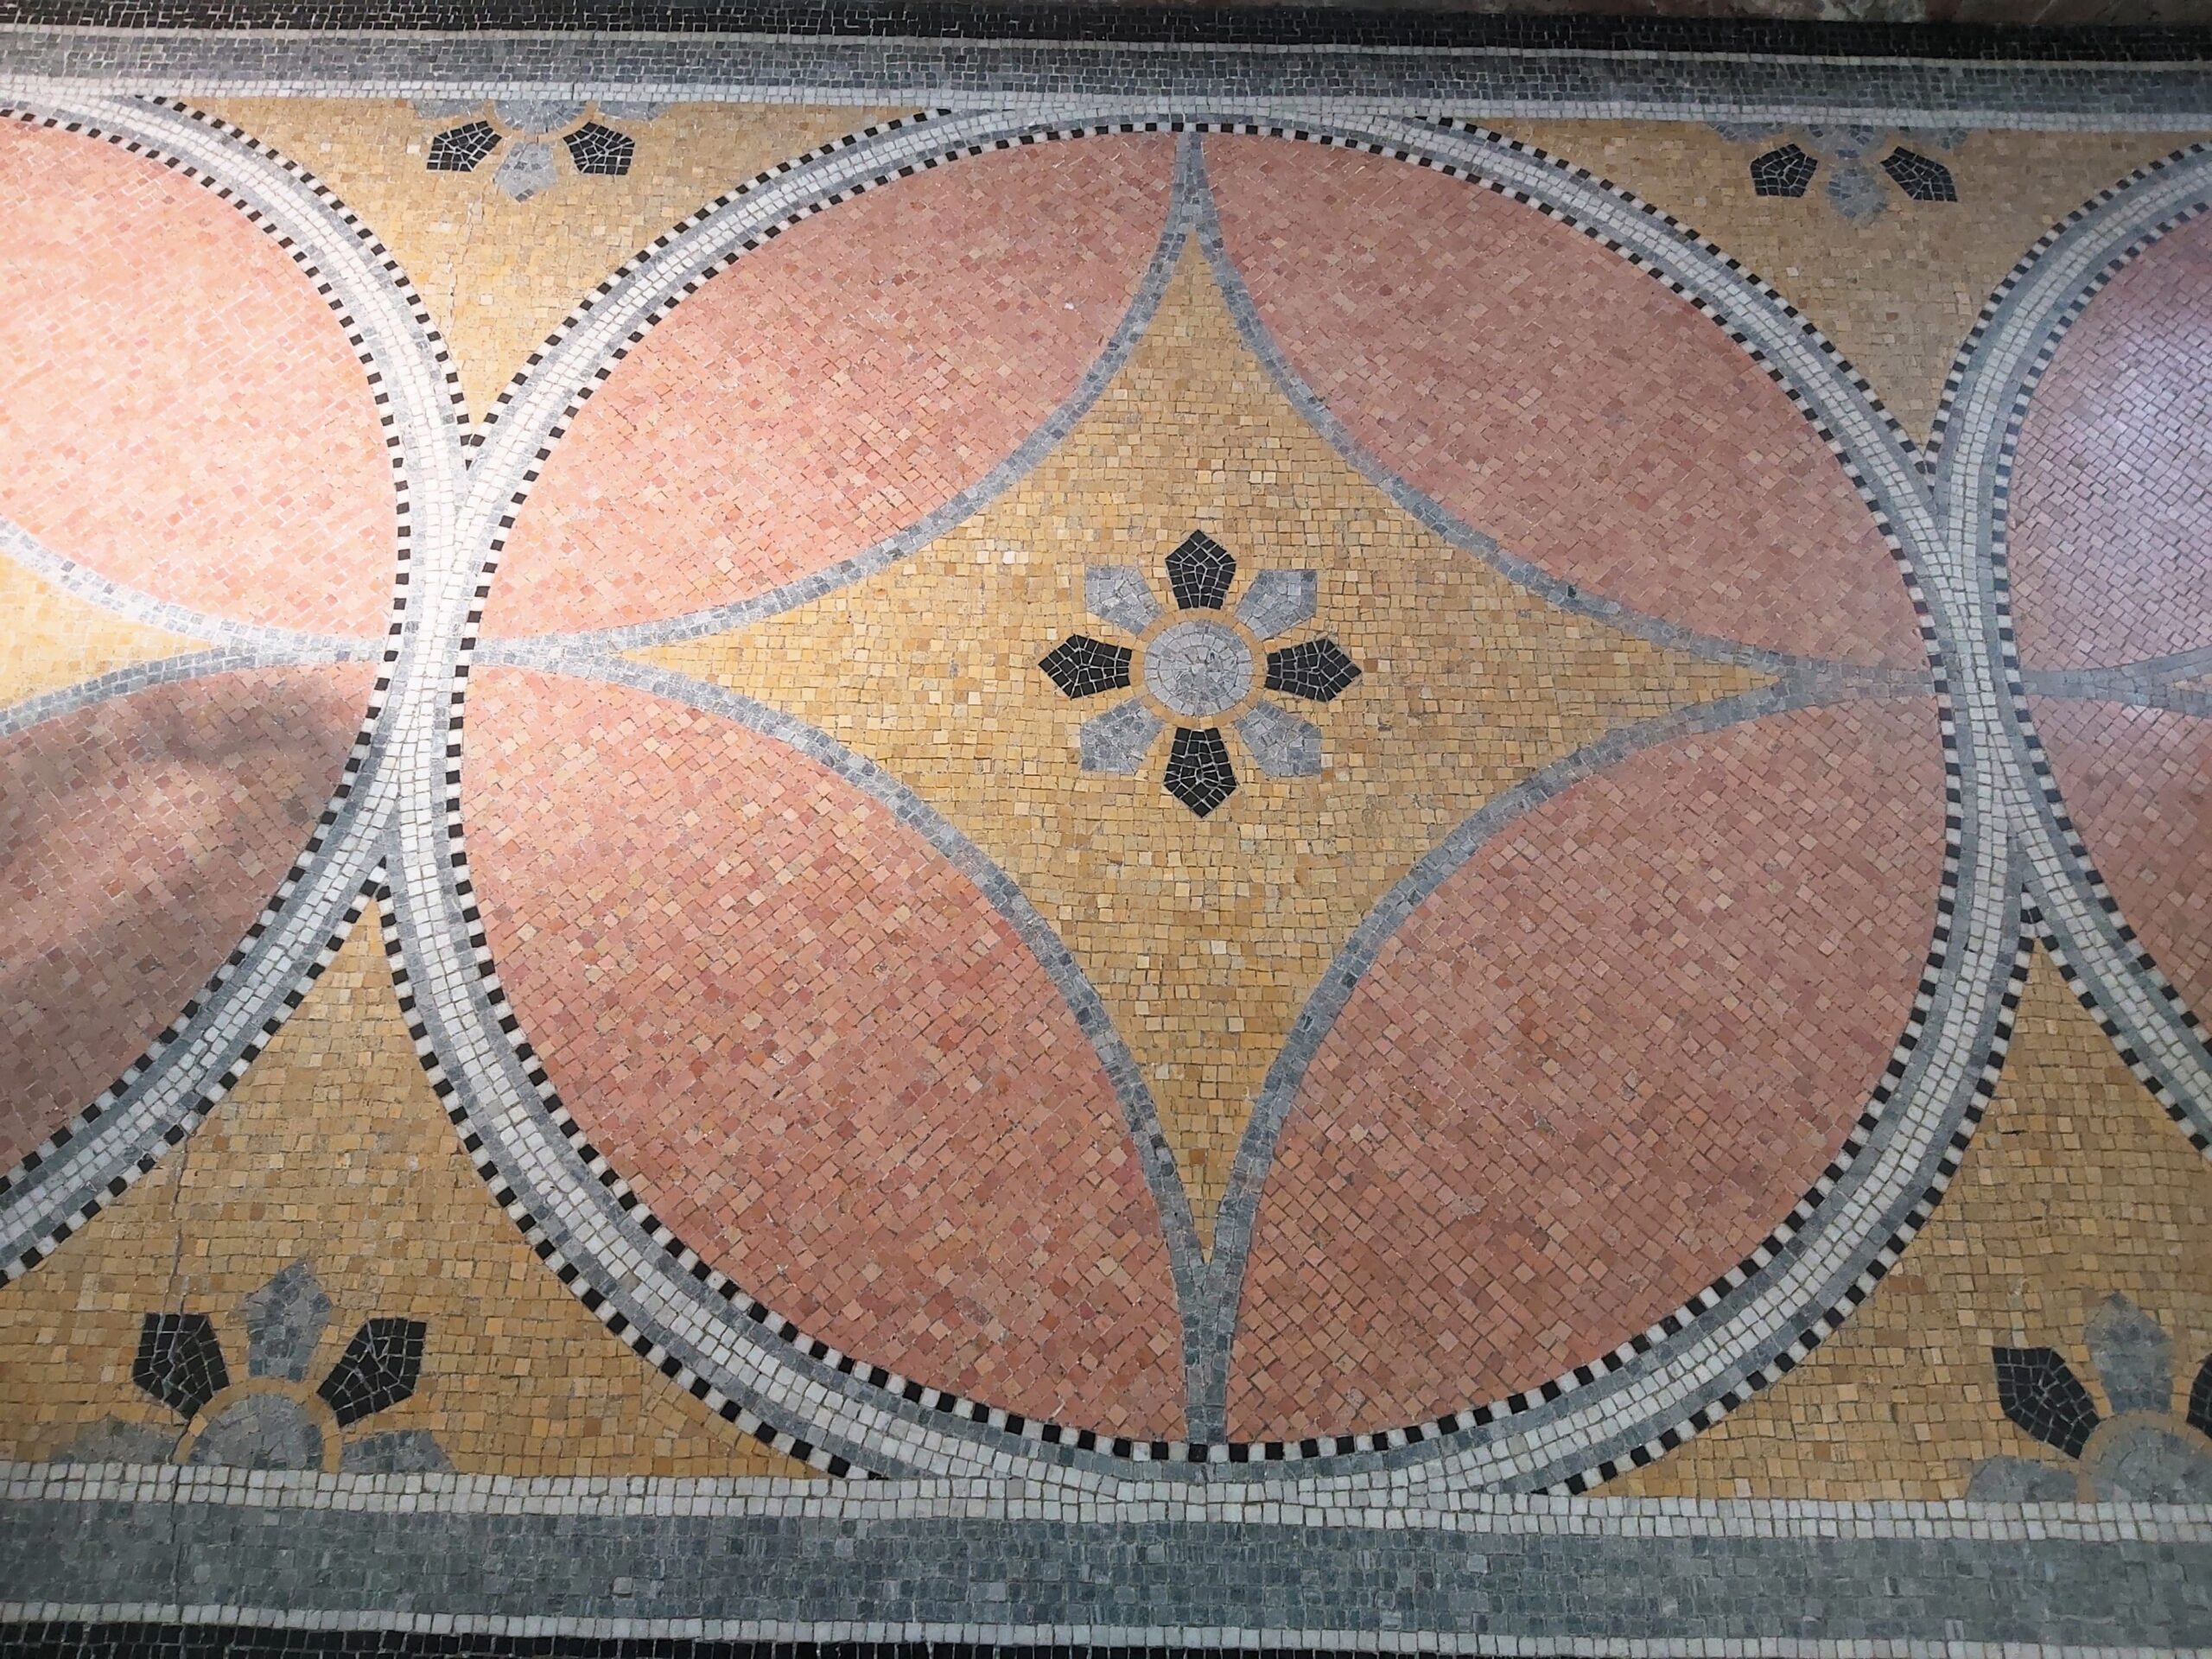 Detailed floor tiling in St Mary's Church, Ware, England